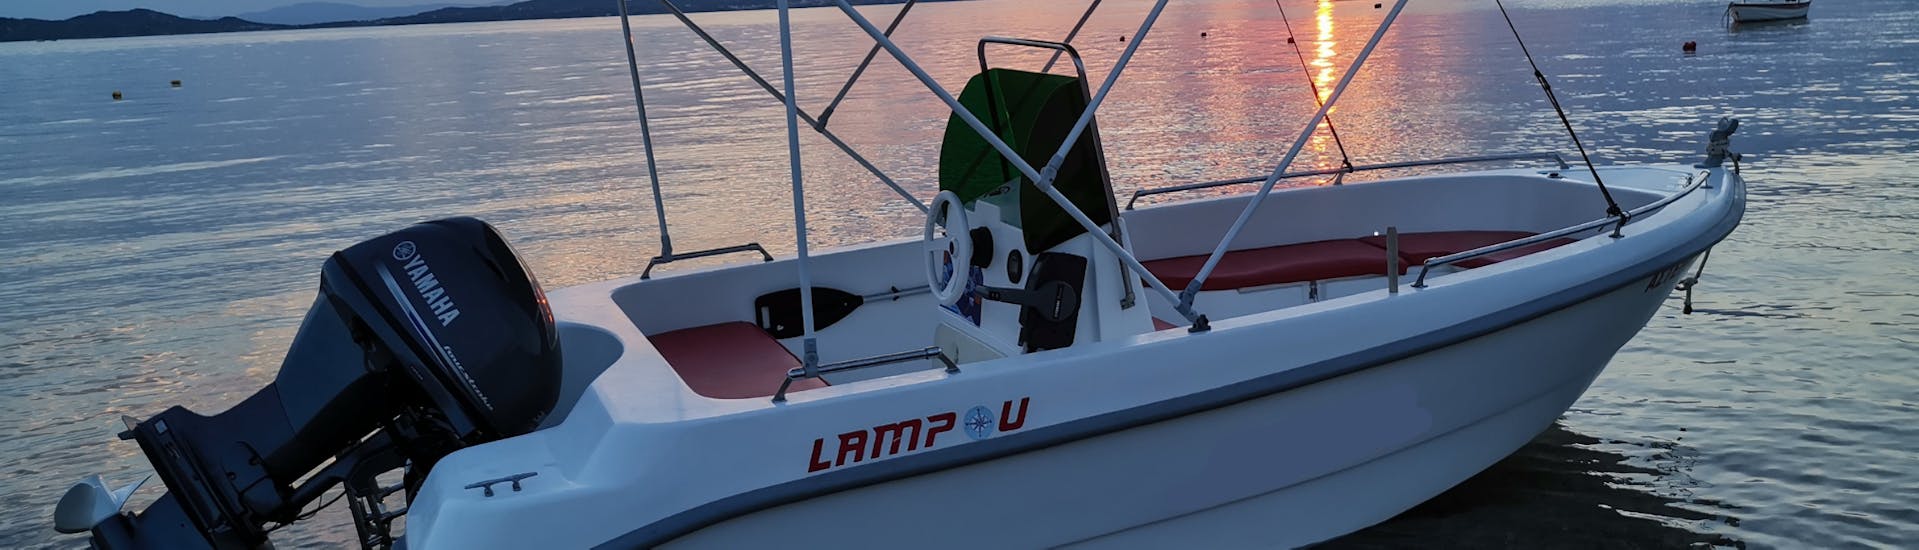 The boat with the beautiful Greek sunset during the Boat Rental in Ouranoupoli (up to 6 people) without Licence with Rent a Boat Lampou.